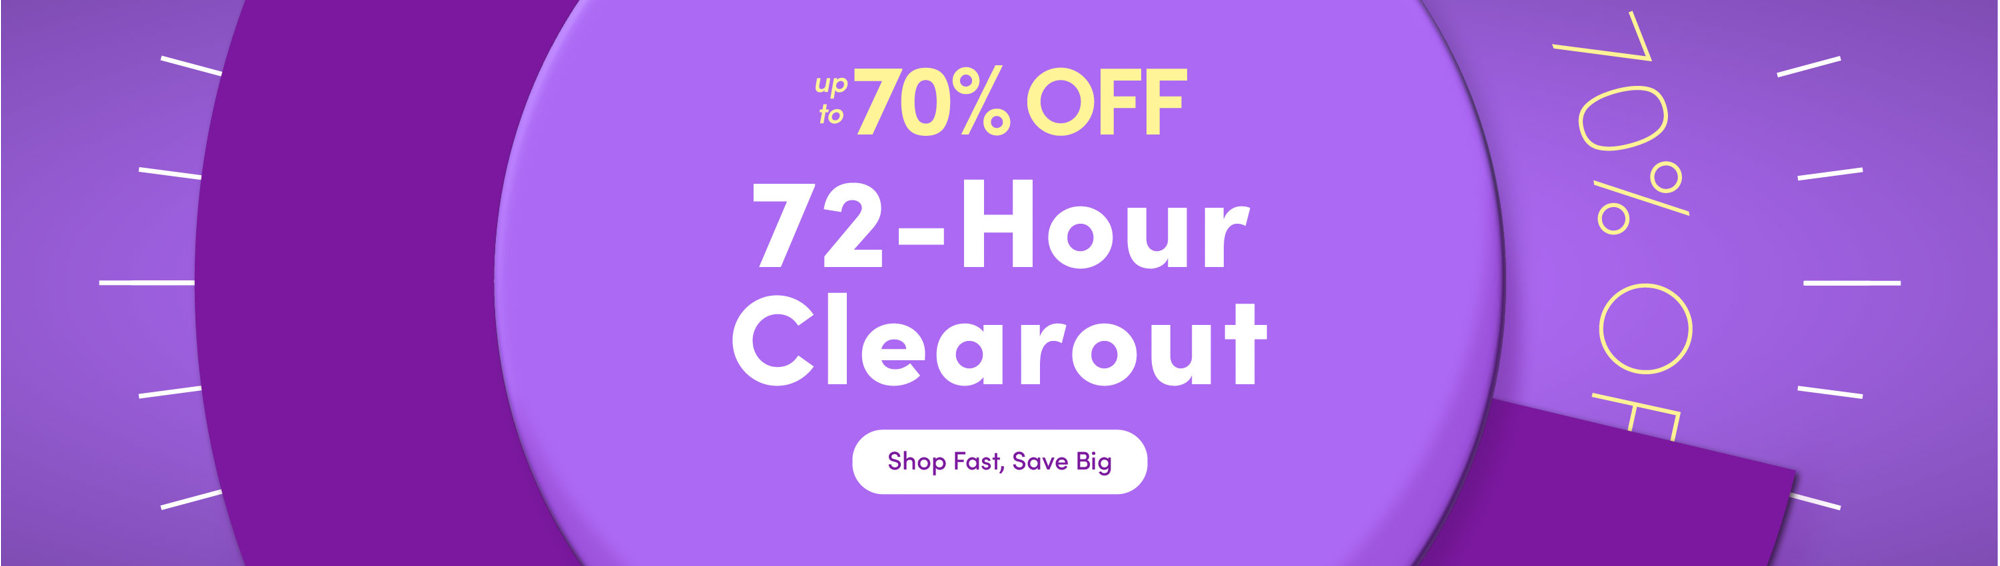 72-Hour Clearout. Shop Fast, Save Big up to 70% OFF